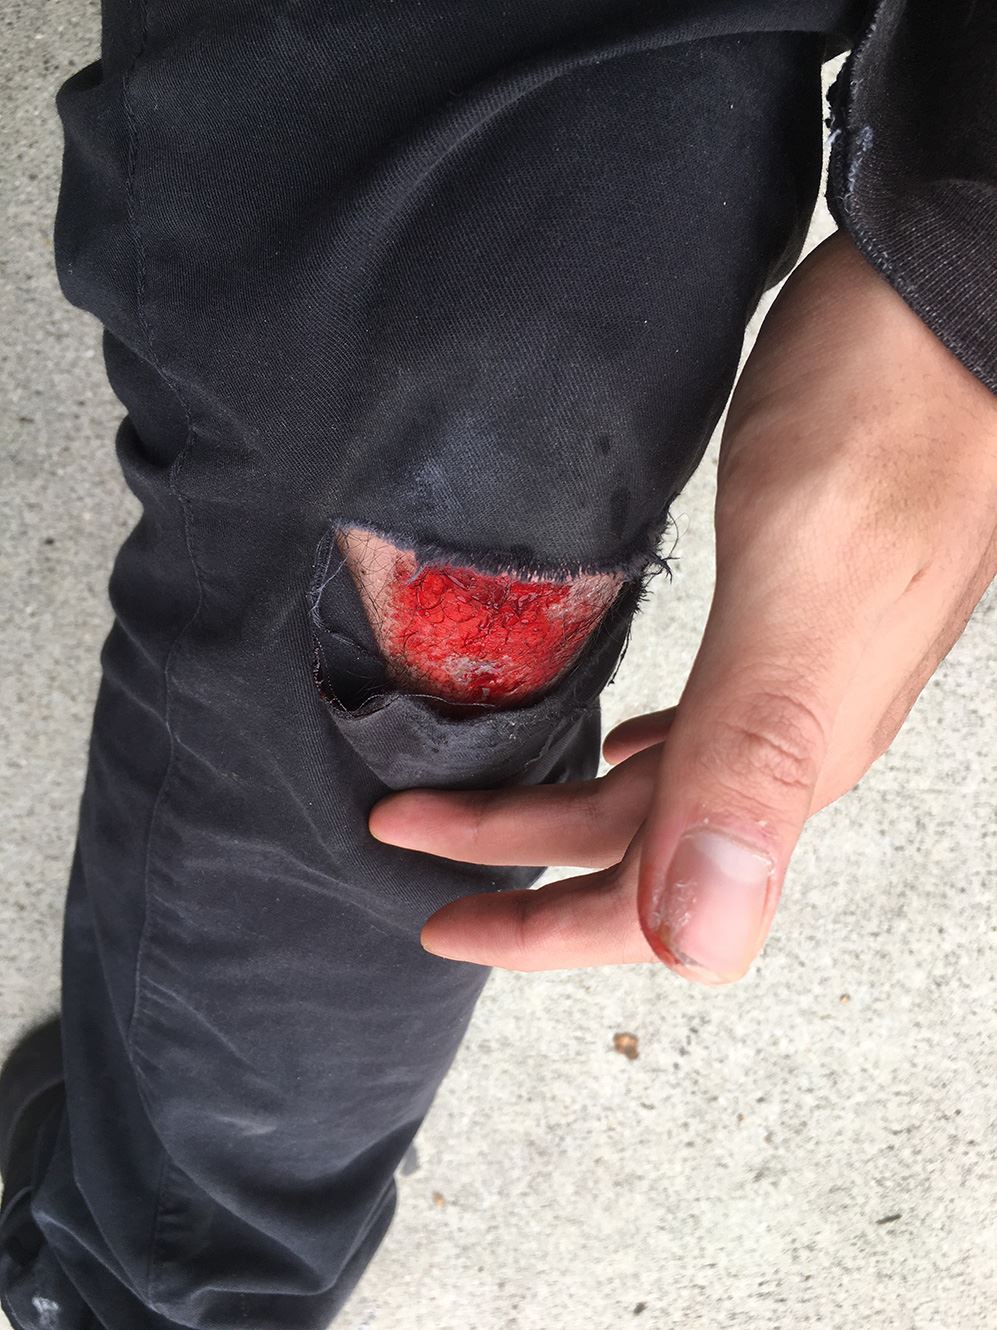 Scraped knee from Lyft scooter accident